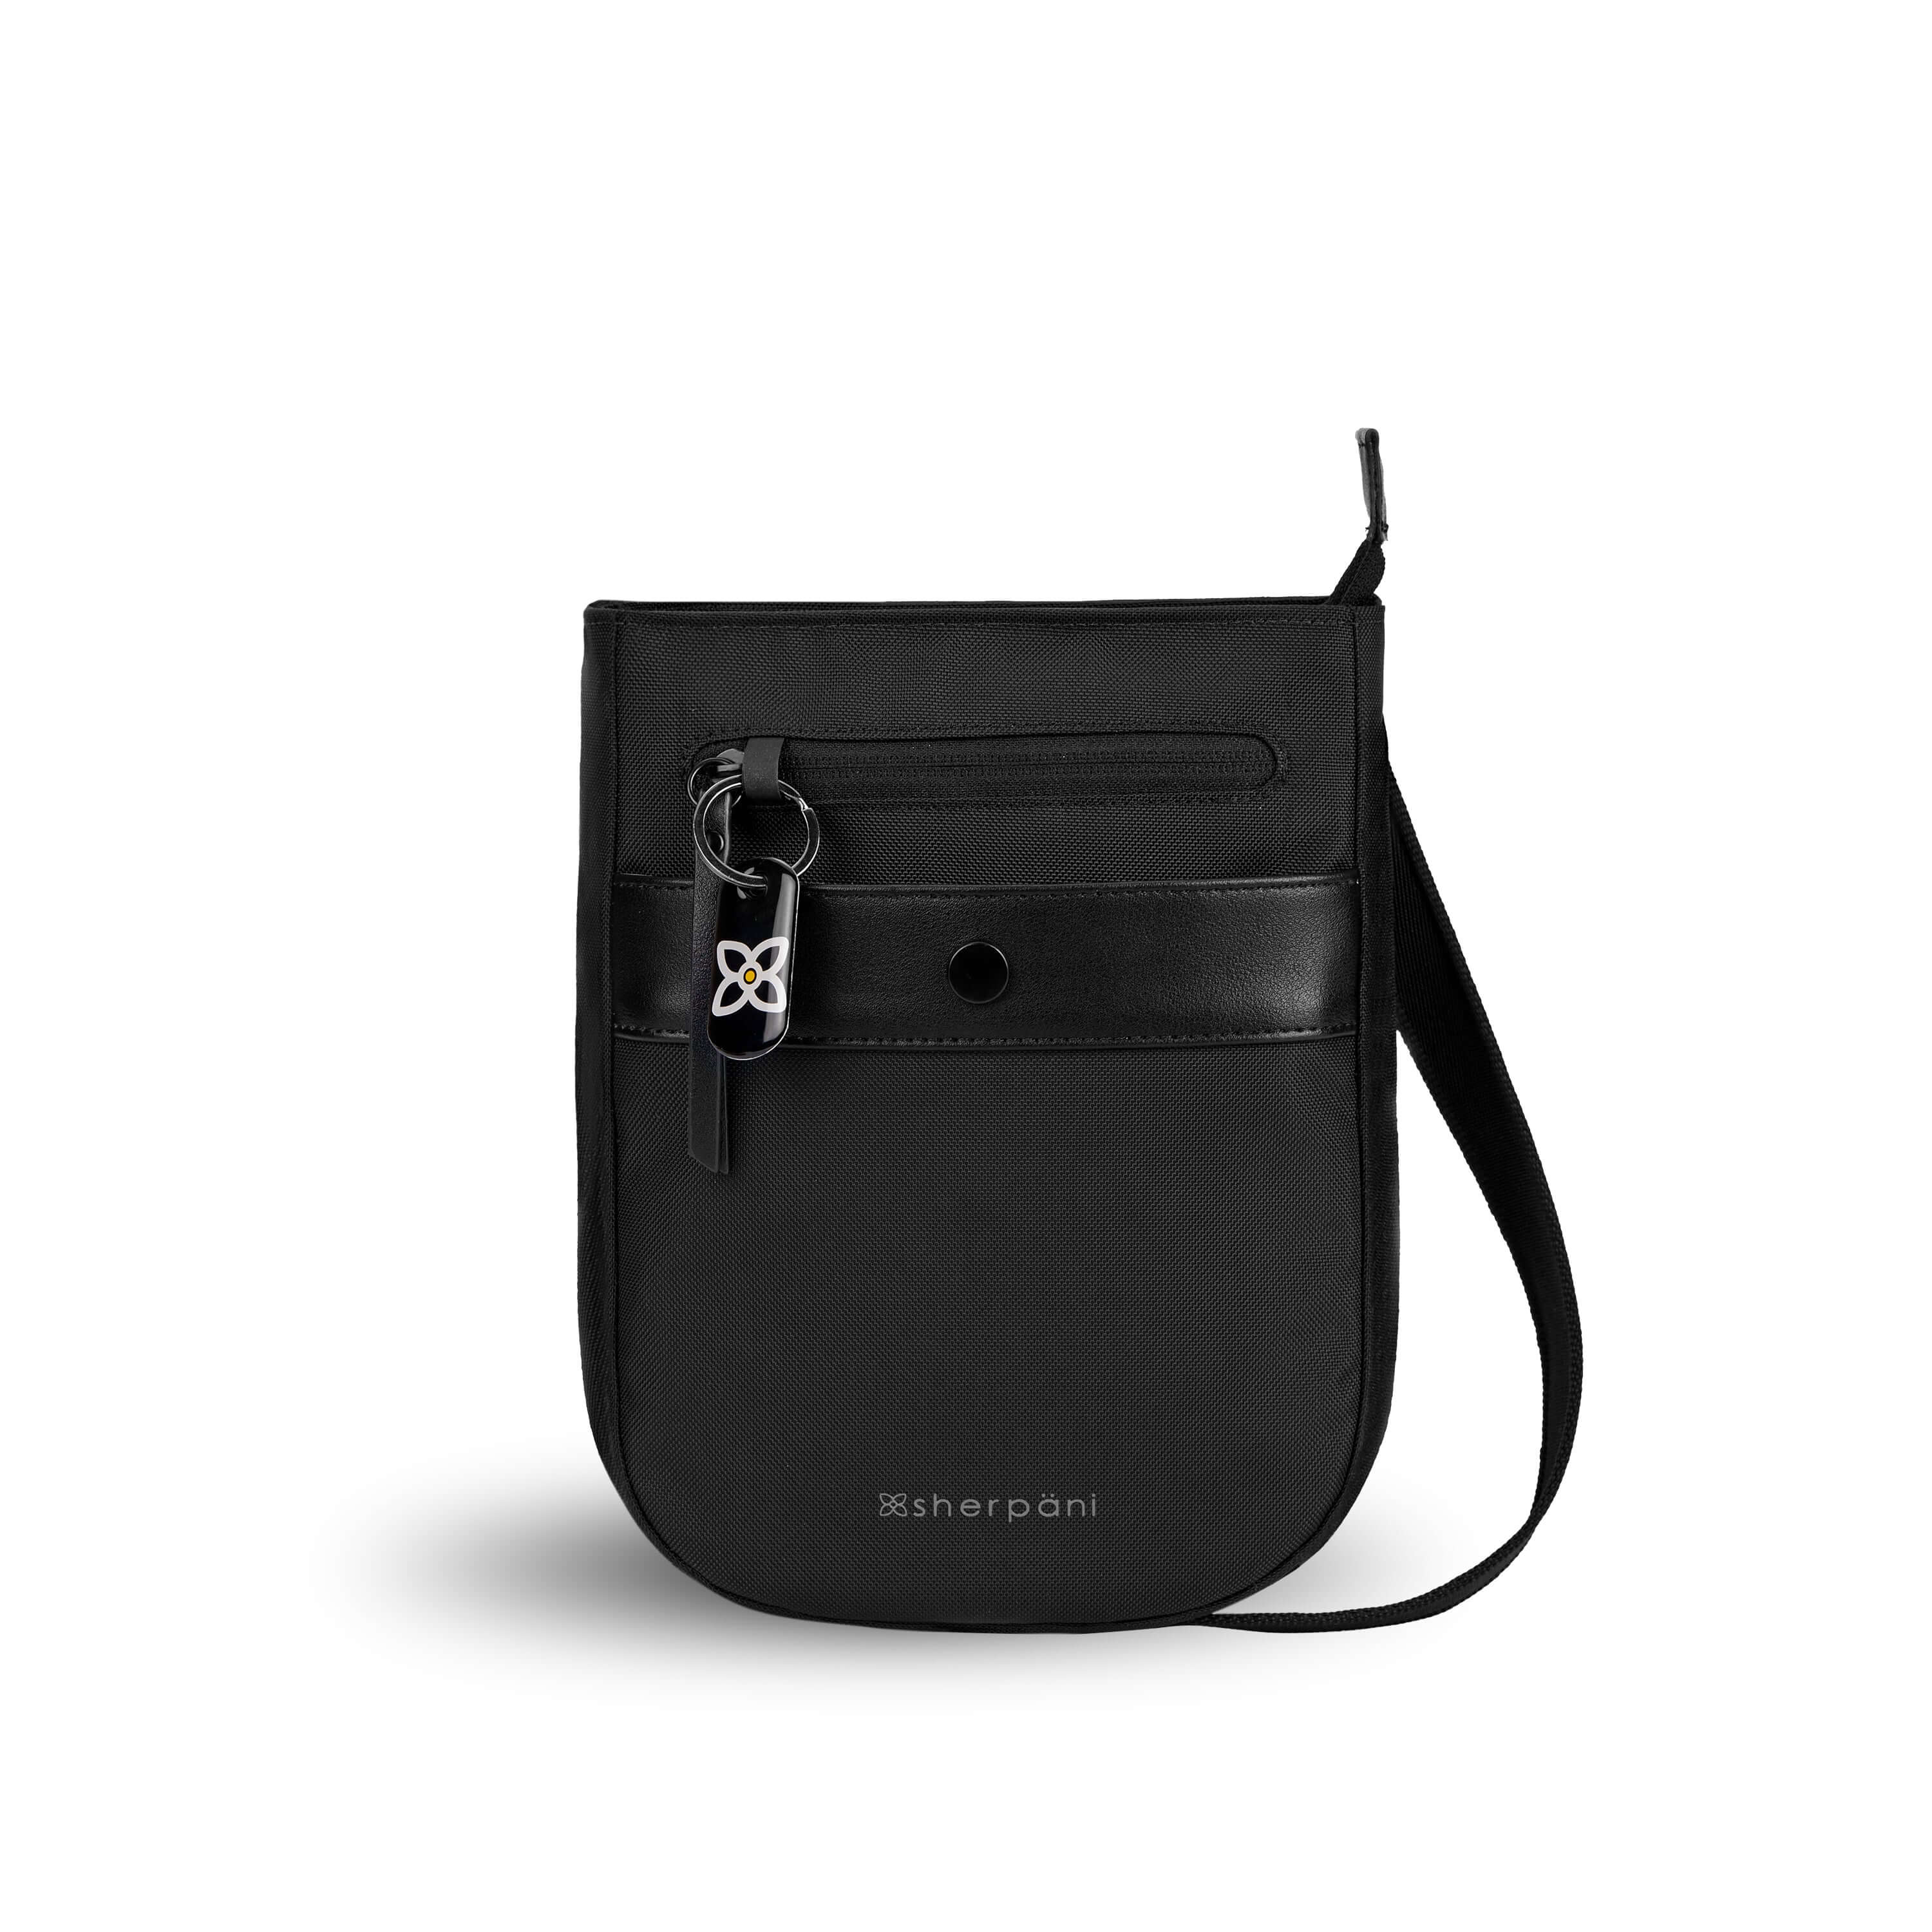 Flat front view of Sherpani’s Anti-Theft bag, the Prima AT in Carbon, with vegan leather accents in black. There is an external pouch on the front of the bag that sits below a locking zipper compartment, which has a ReturnMe tag clipped to it. The bag features an adjustable crossbody strap.